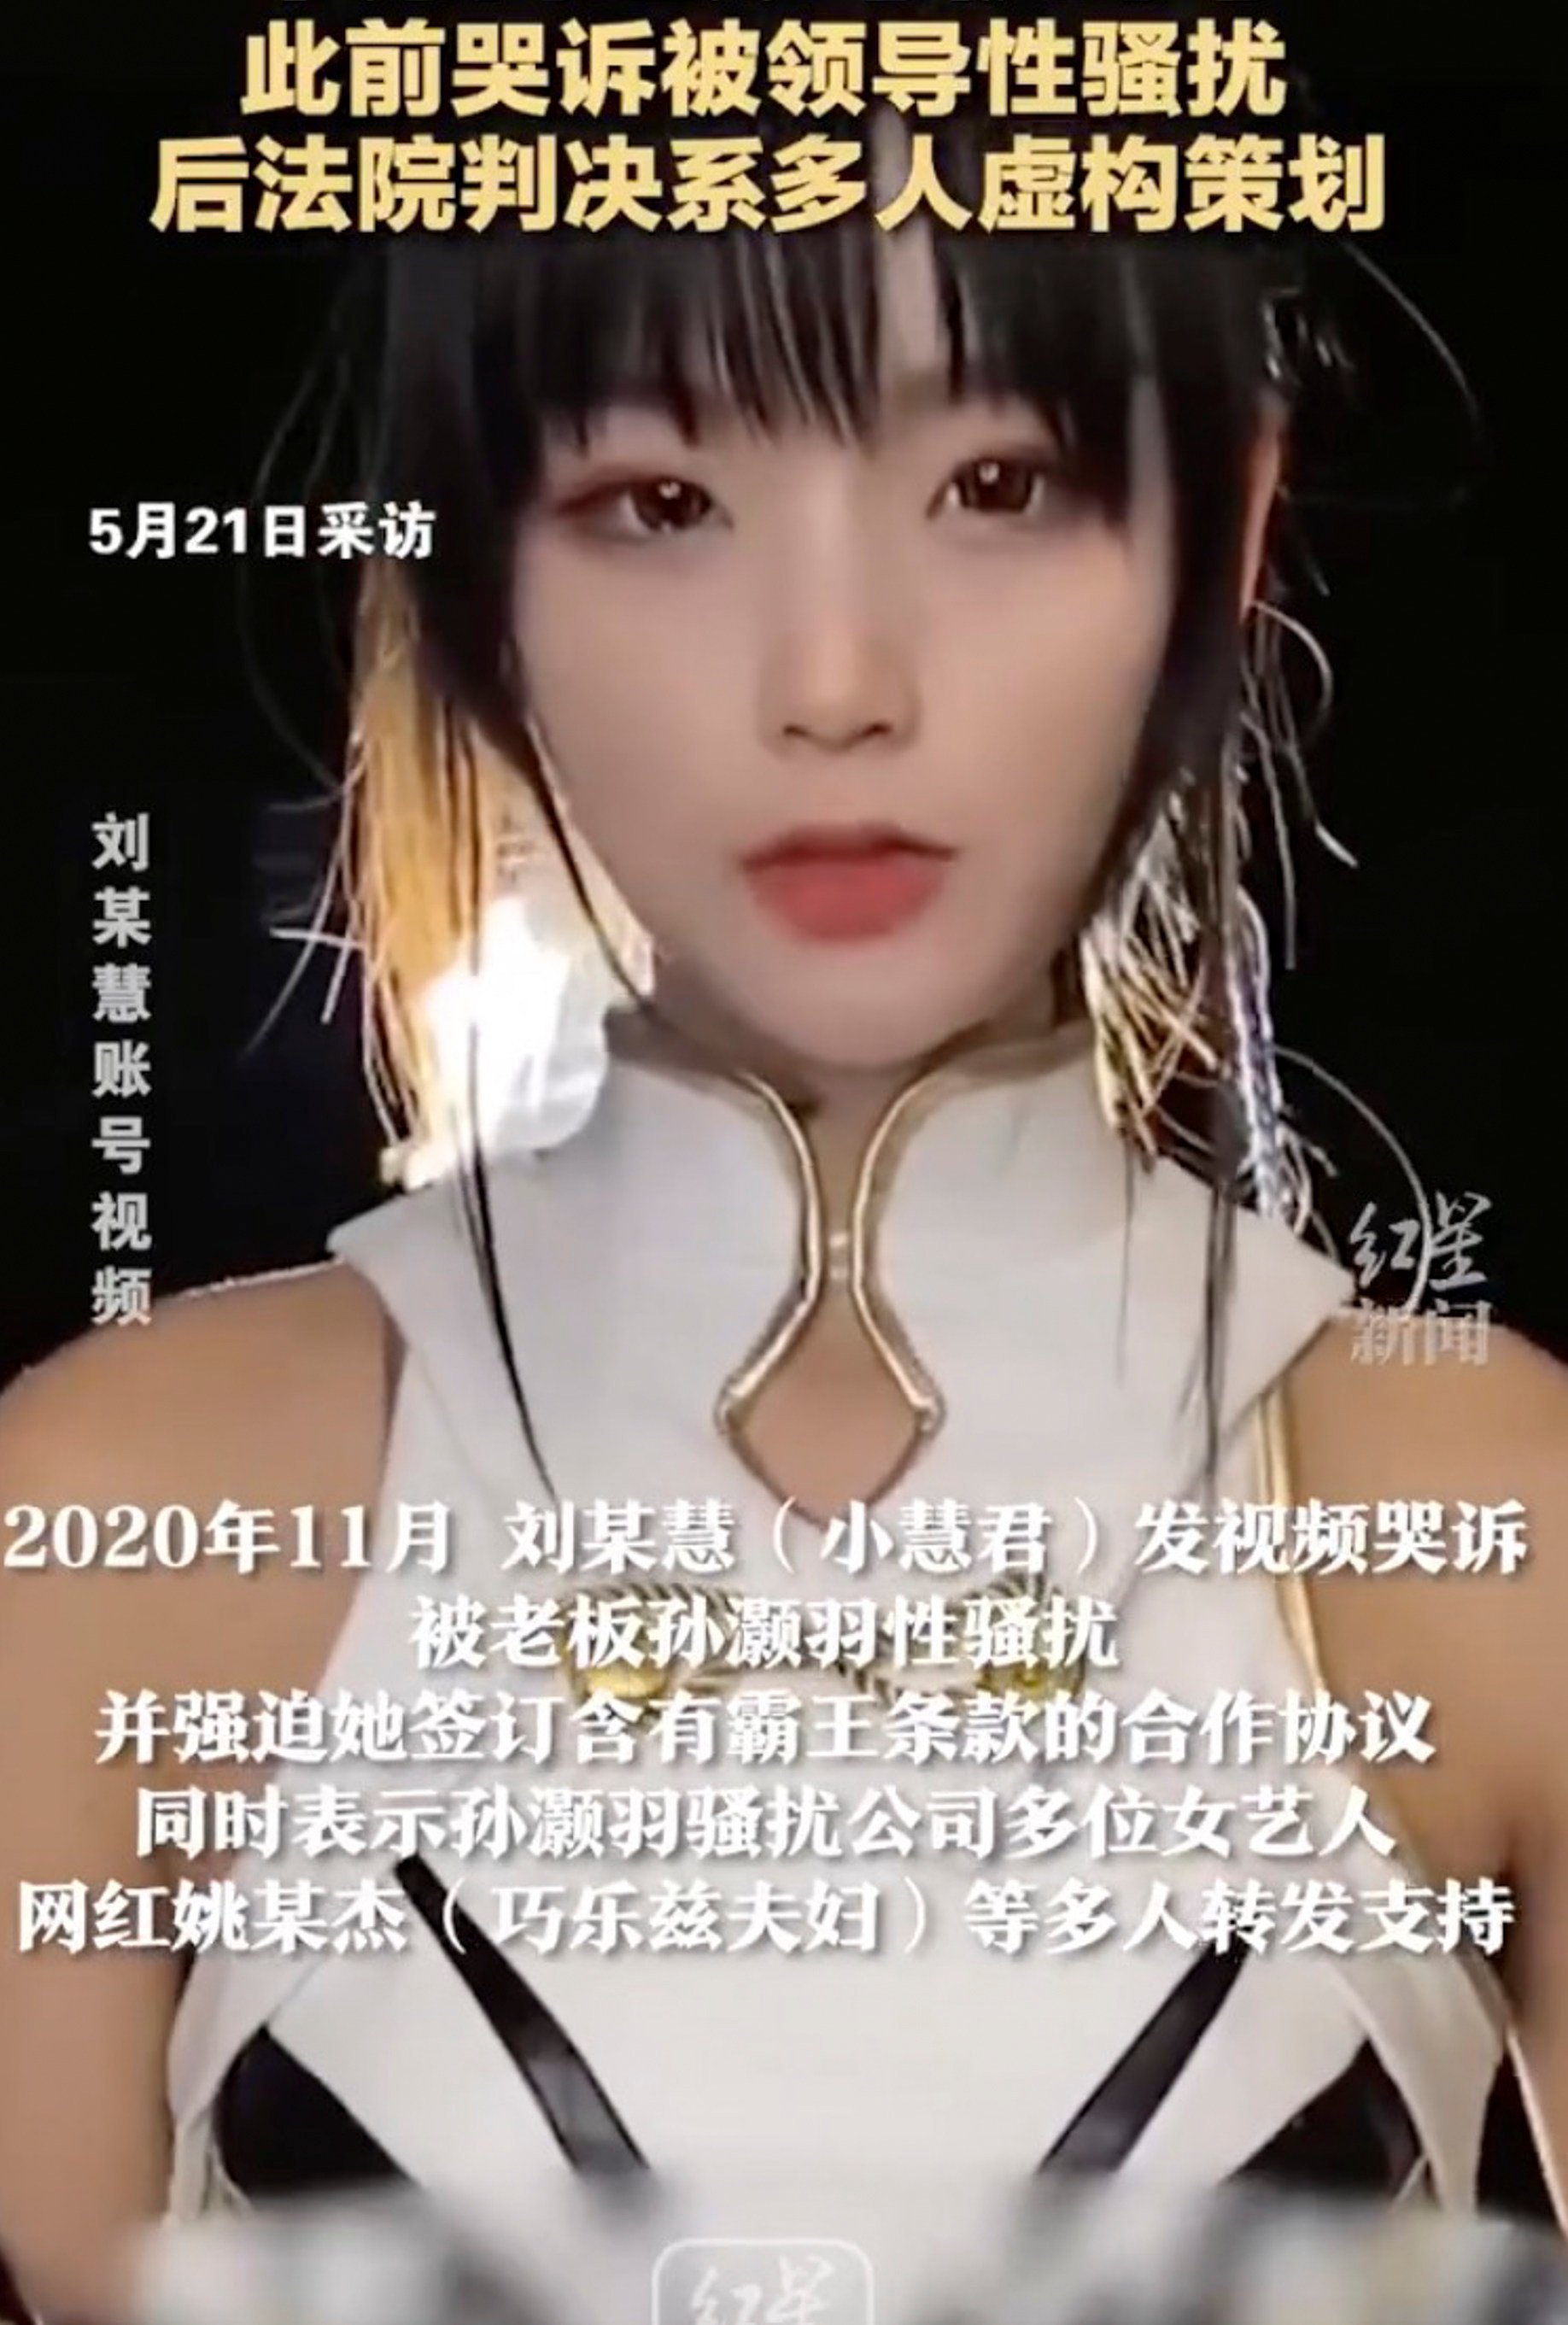 Chinese influencer’s account with 13 million fans frozen after court finds false claim of sexual advances for ‘low cost’ contract exit